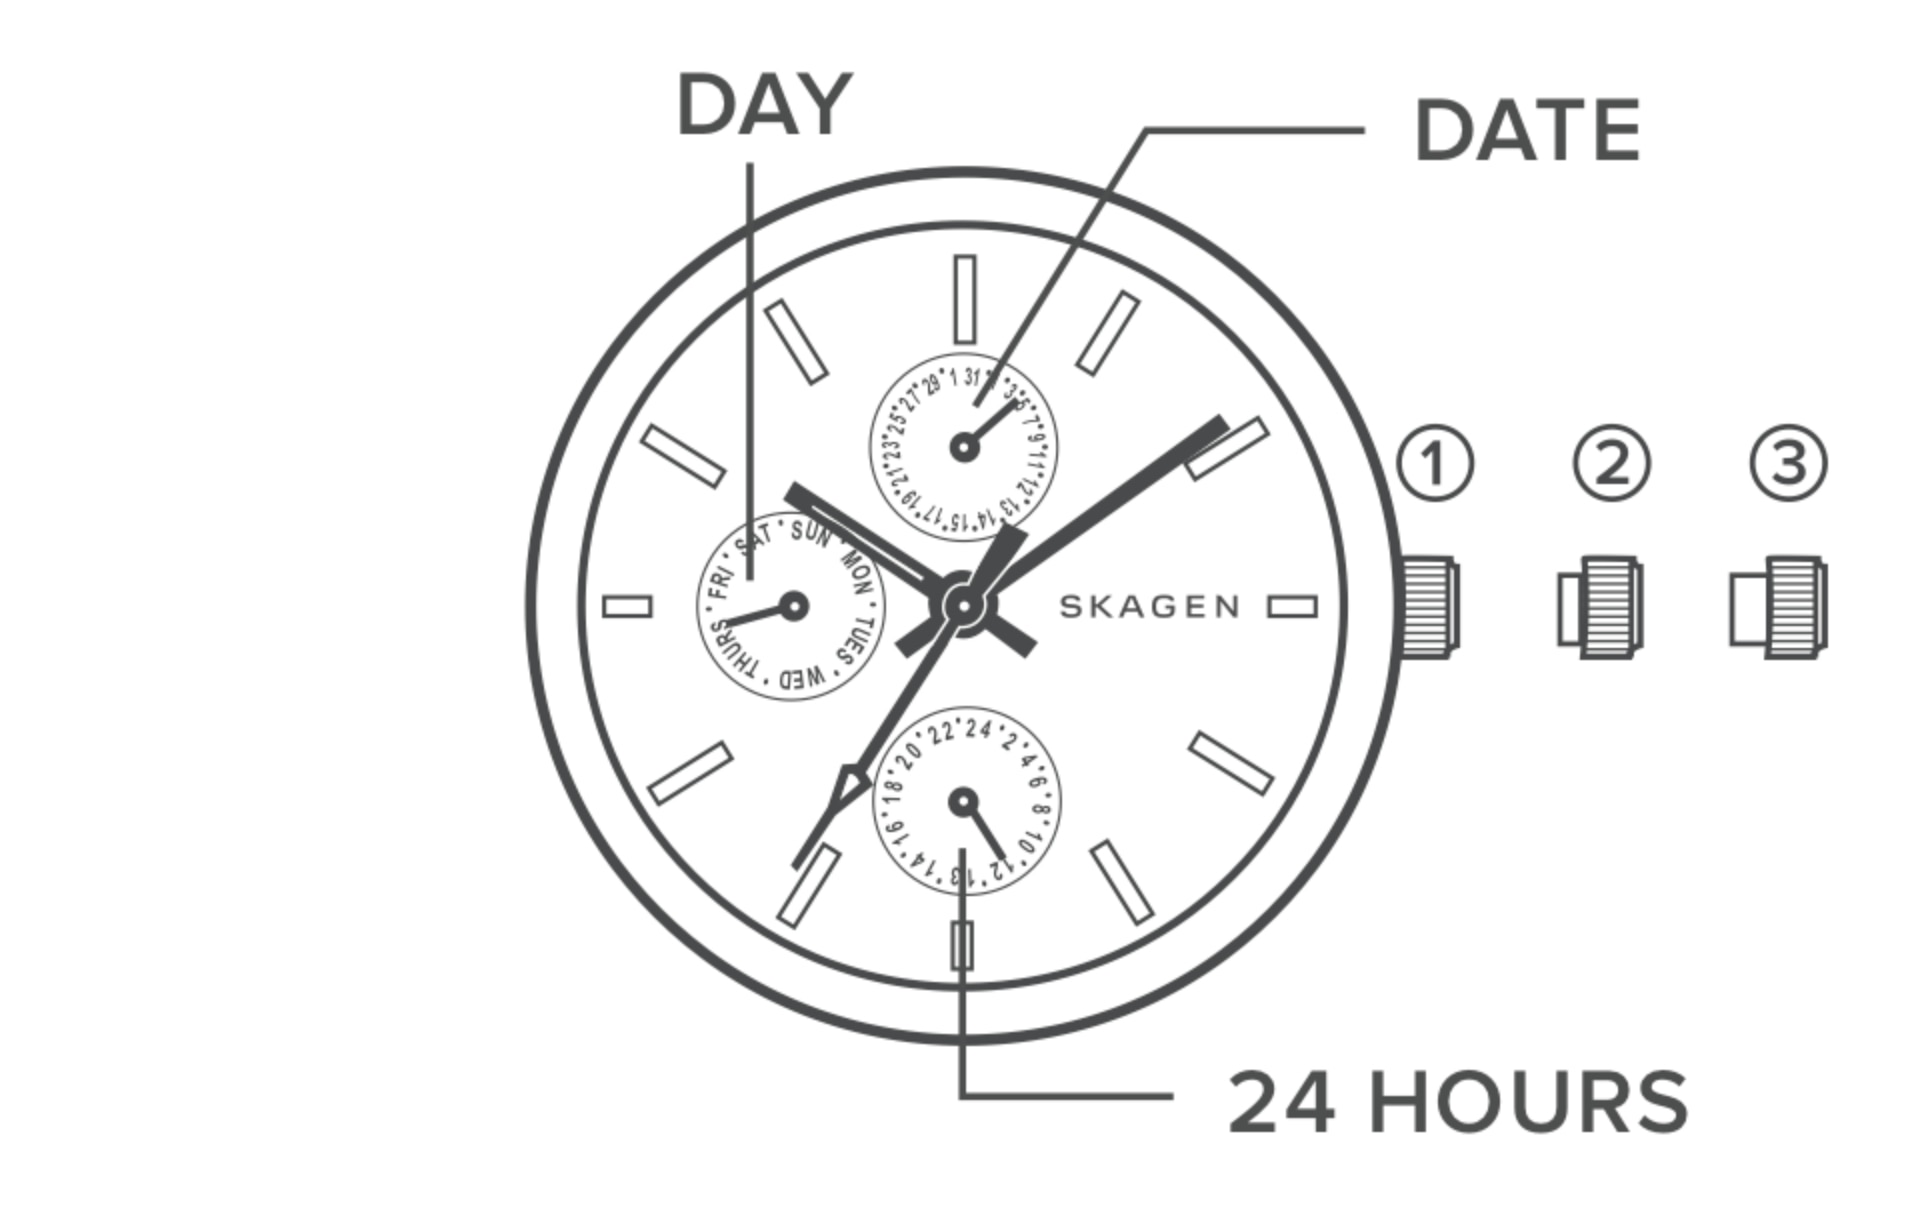 line art of a multifunction watch dial, identifying the crown, day, date, and 24 hour hand.